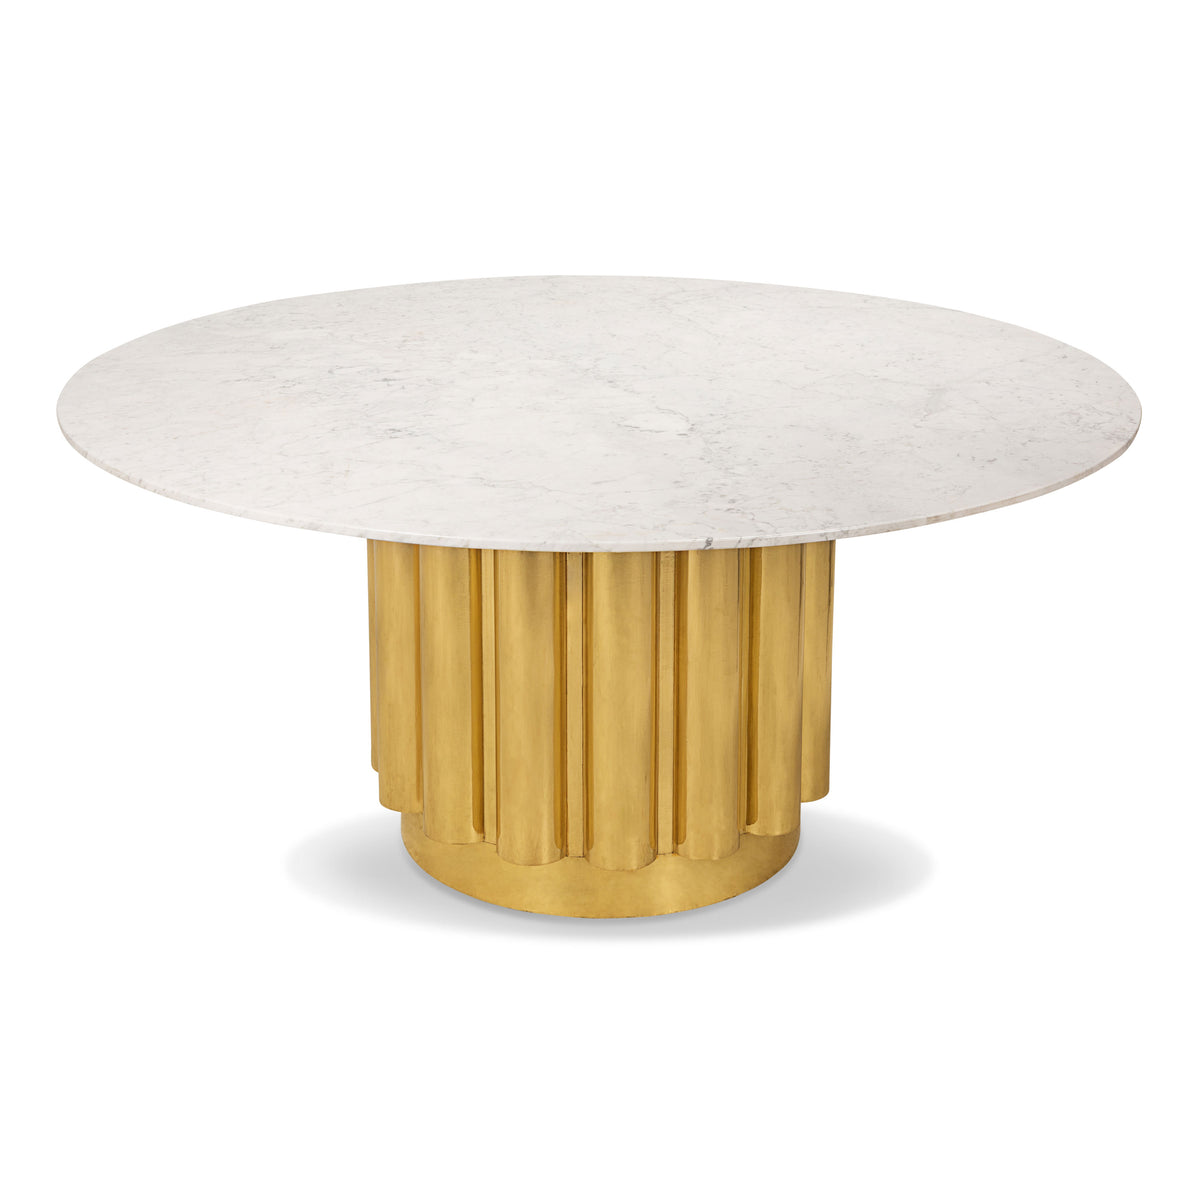 Eden Rock Dining Table in Shiny Brass Base